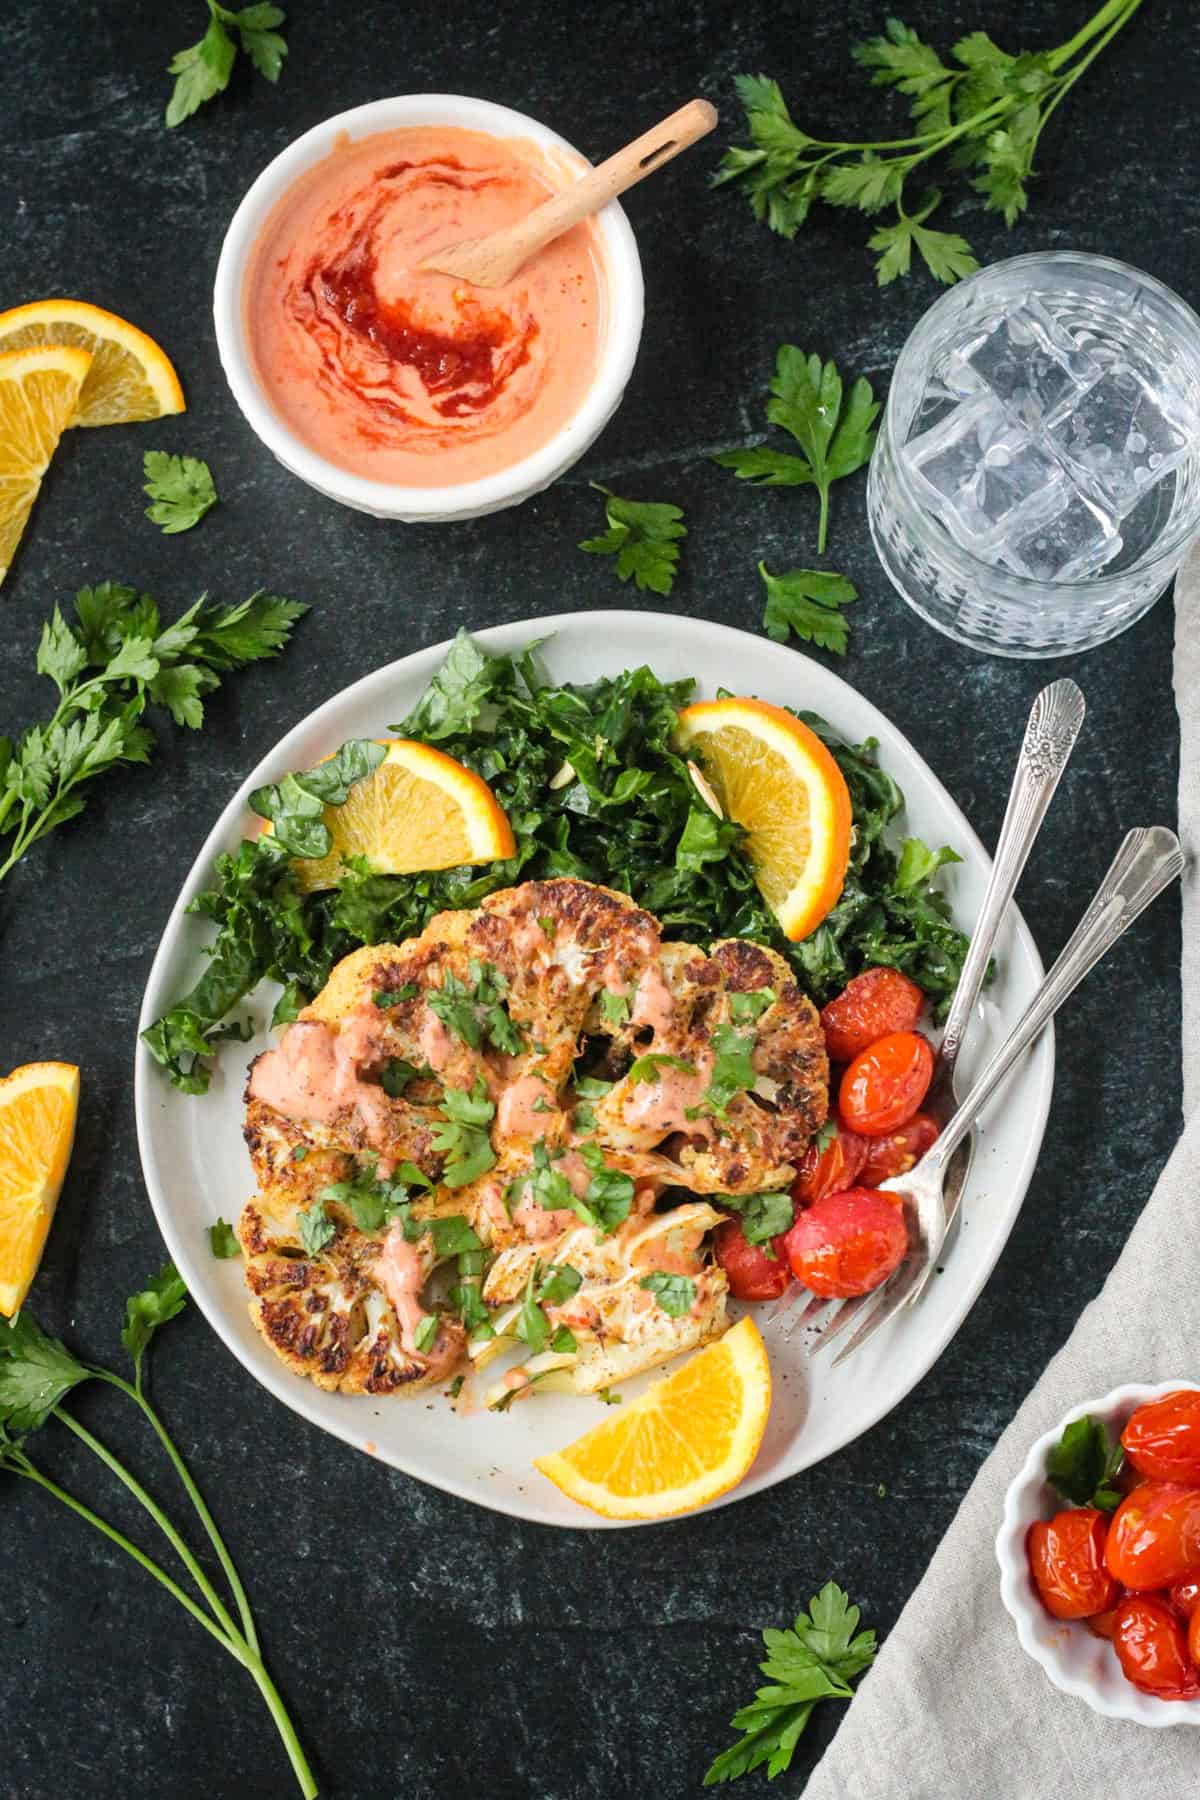 One roasted cauliflower steak garnished with spicy yogurt sauce and chopped parsley on a plate with kale salad and tomatoes.